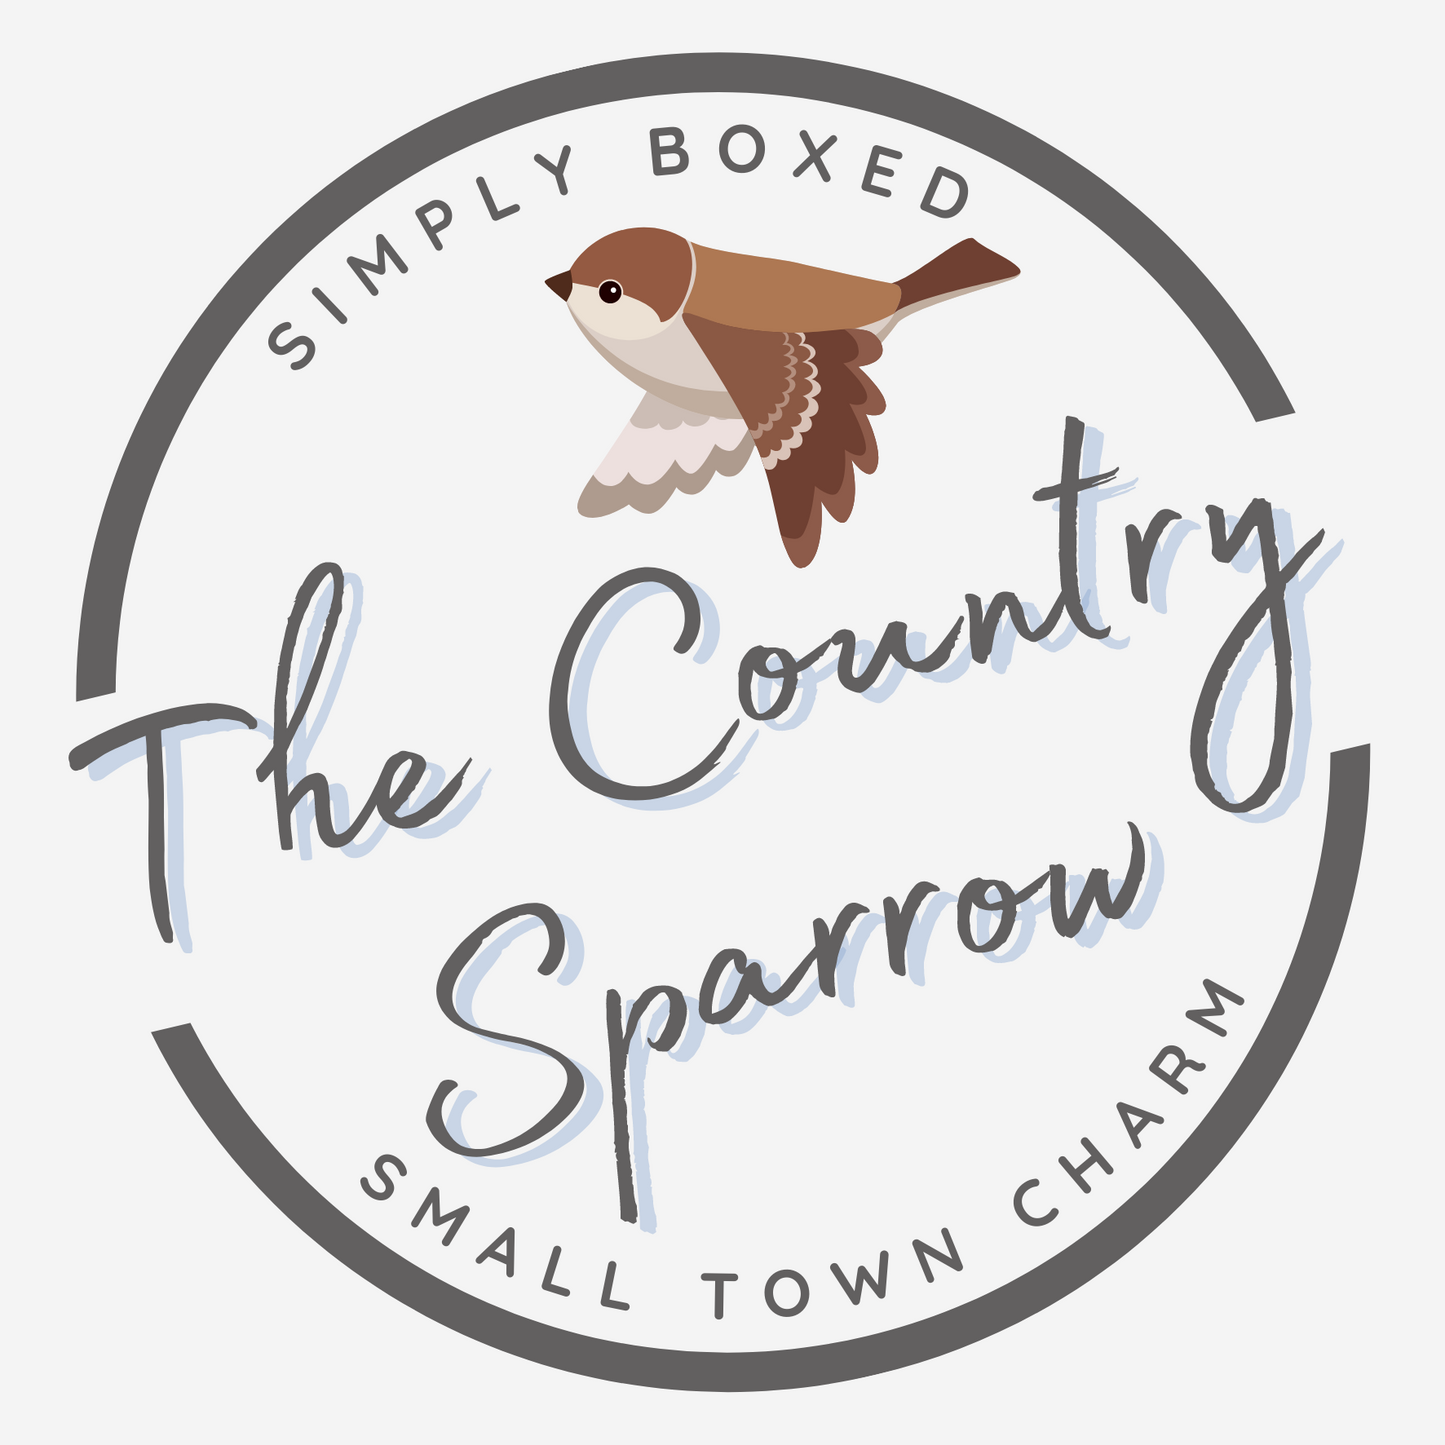 The Country Sparrow Monthly Box - Preorder